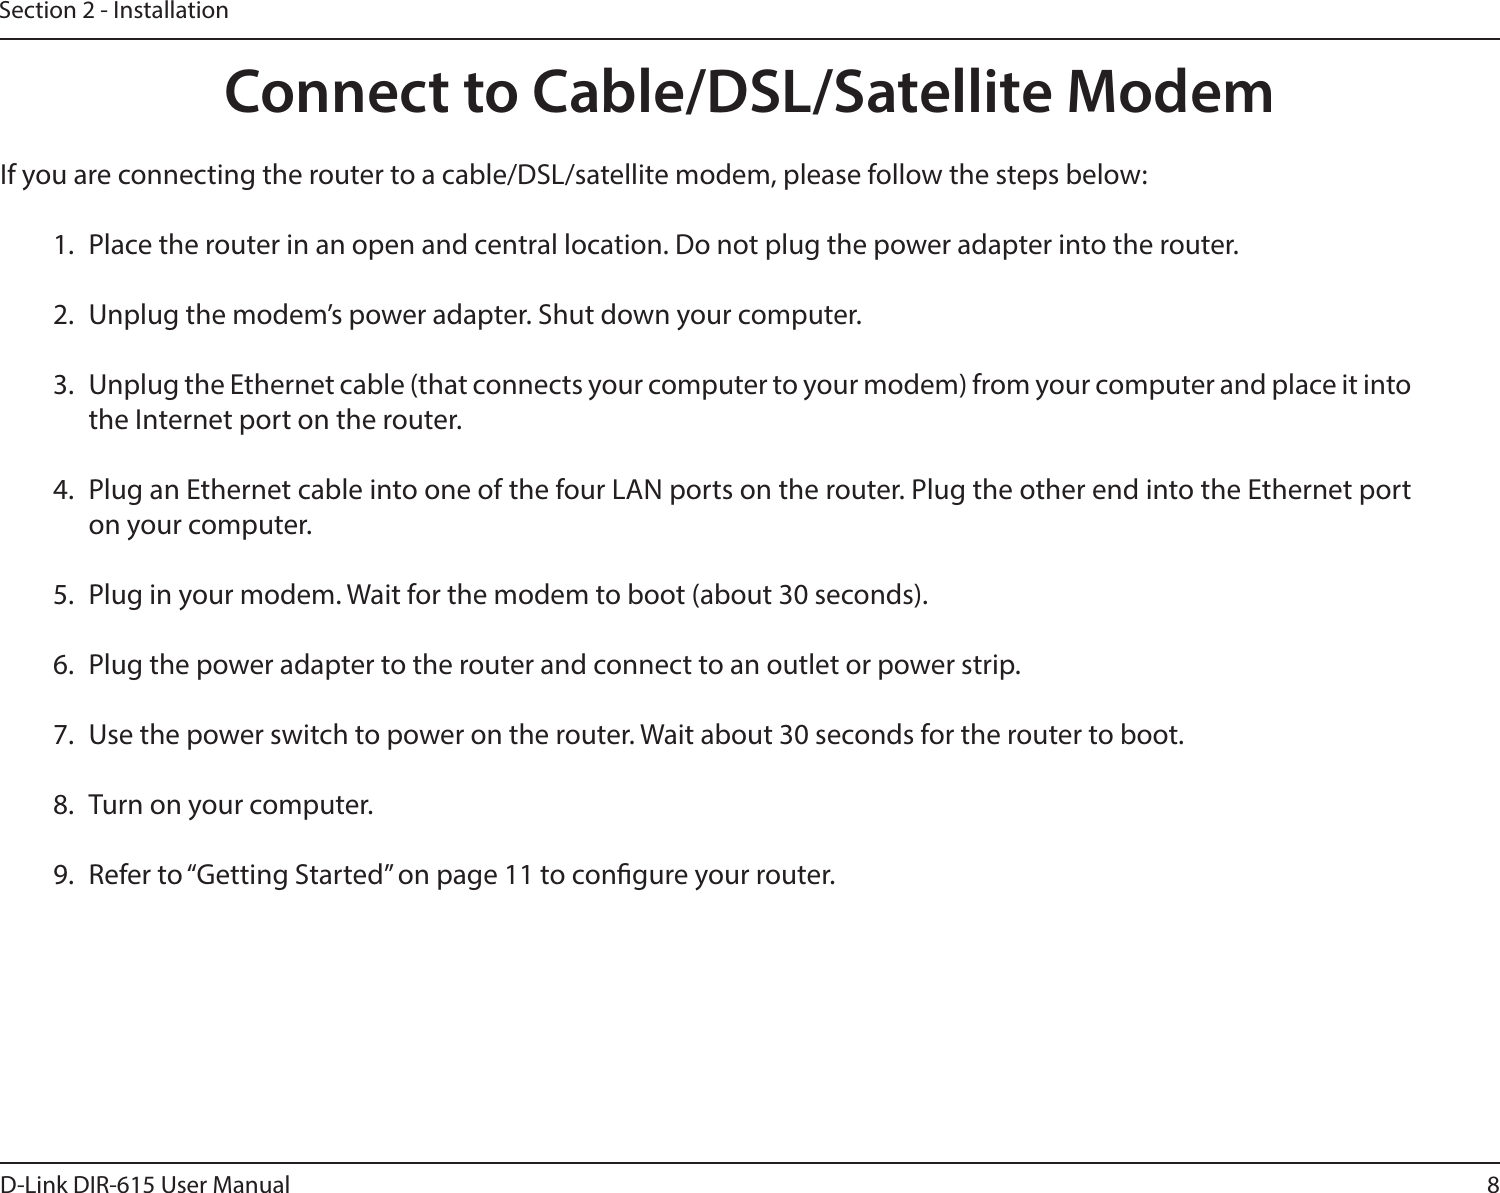 8D-Link DIR-615 User ManualSection 2 - InstallationIf you are connecting the router to a cable/DSL/satellite modem, please follow the steps below:1.  Place the router in an open and central location. Do not plug the power adapter into the router.2.  Unplug the modem’s power adapter. Shut down your computer.3.  Unplug the Ethernet cable (that connects your computer to your modem) from your computer and place it into the Internet port on the router.4.  Plug an Ethernet cable into one of the four LAN ports on the router. Plug the other end into the Ethernet port on your computer.5.  Plug in your modem. Wait for the modem to boot (about 30 seconds).6.  Plug the power adapter to the router and connect to an outlet or power strip. 7.  Use the power switch to power on the router. Wait about 30 seconds for the router to boot.8.  Turn on your computer.9.  Refer to “Getting Started” on page 11 to congure your router.Connect to Cable/DSL/Satellite Modem